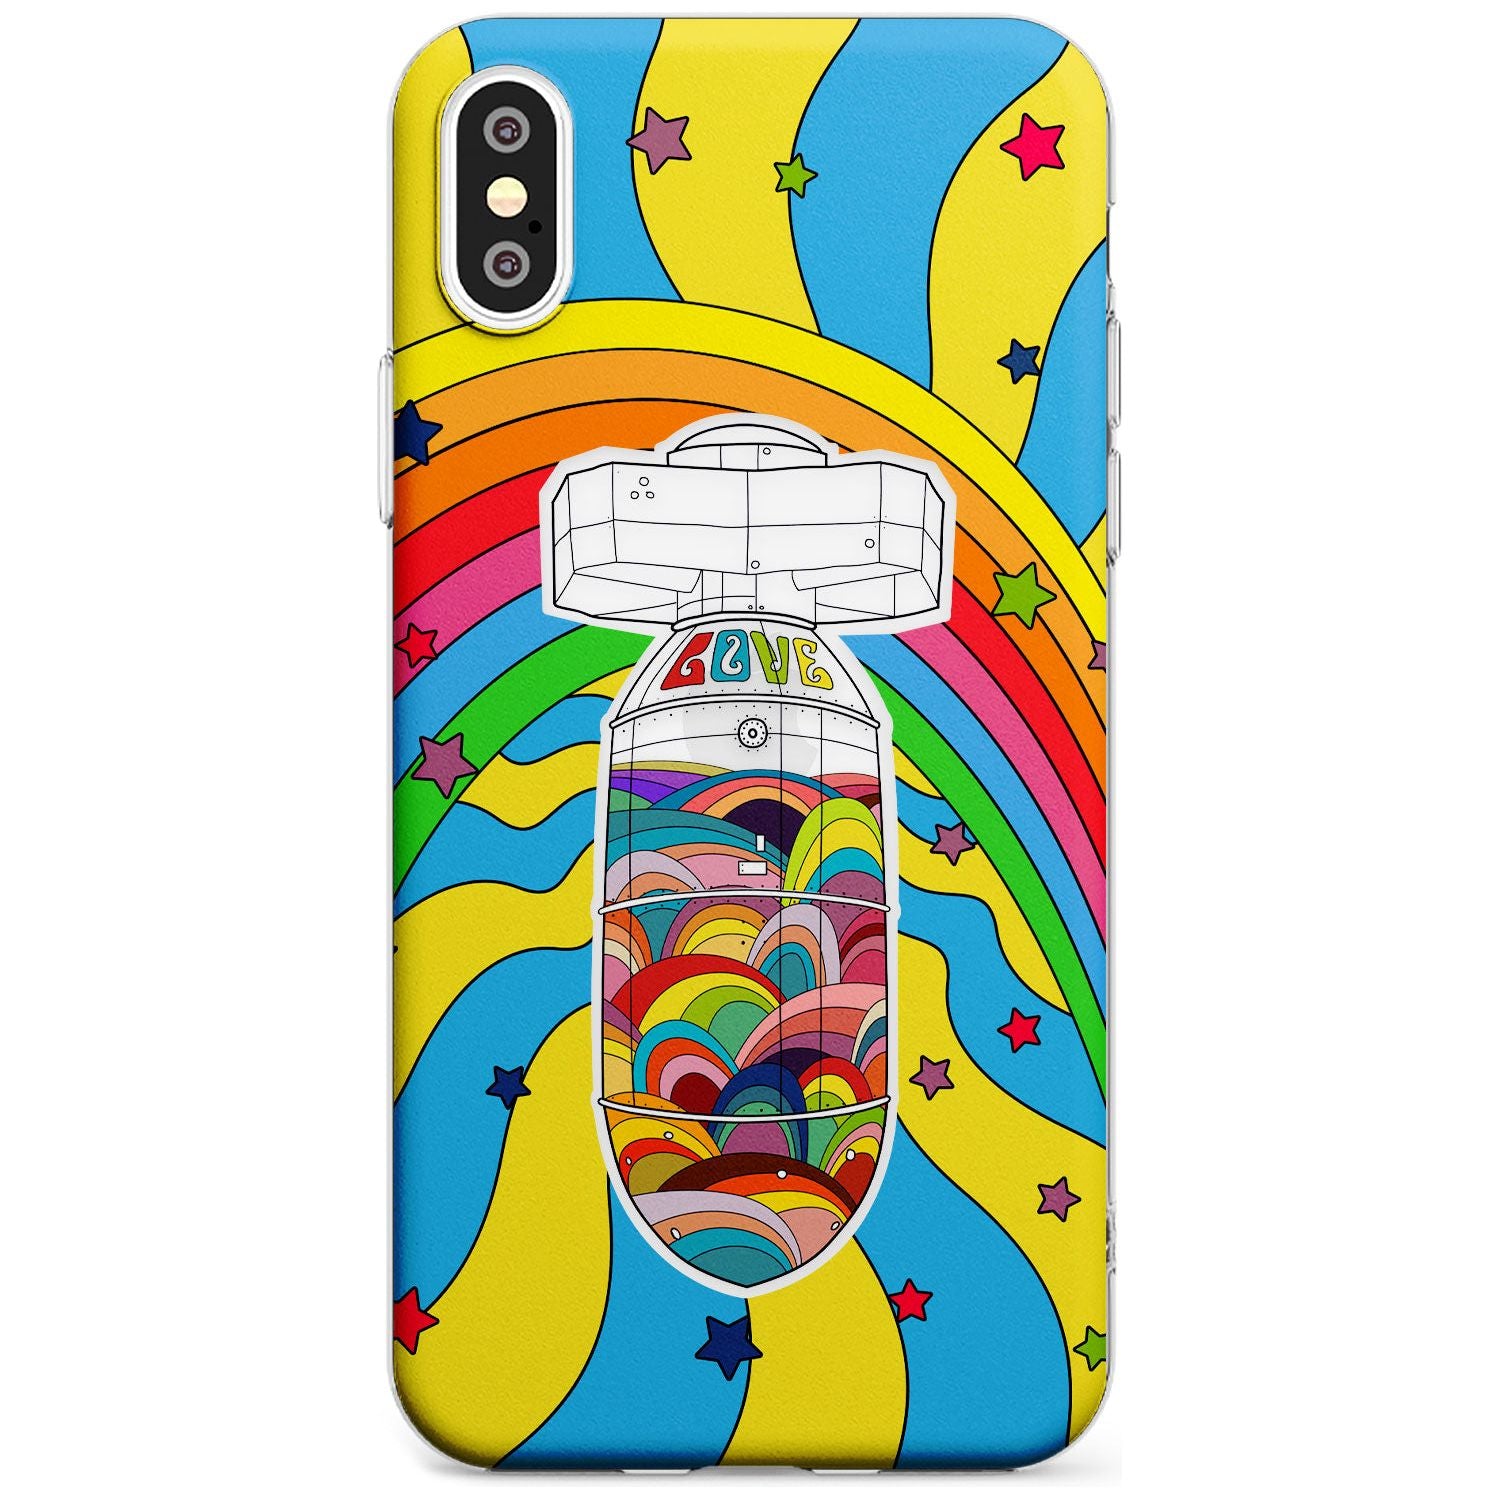 Love Bomb Black Impact Phone Case for iPhone X XS Max XR